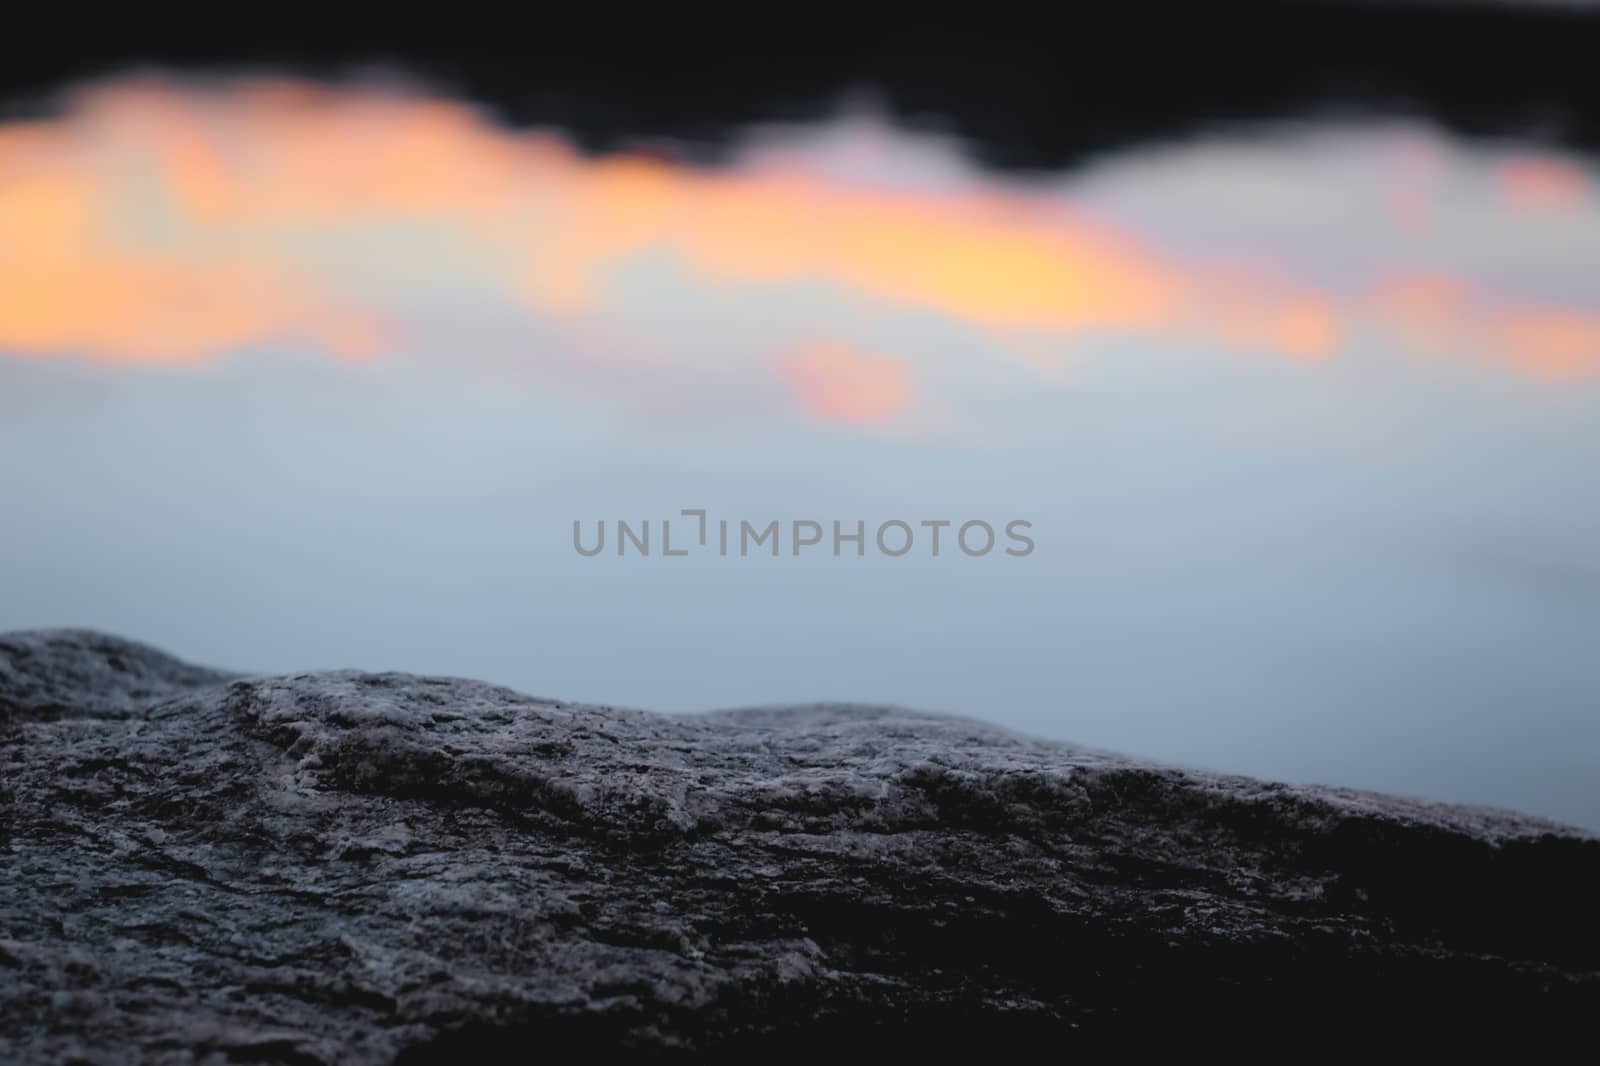 Calm, serene natural environment. Rock texture close up against twilight sky reflections on a lake.